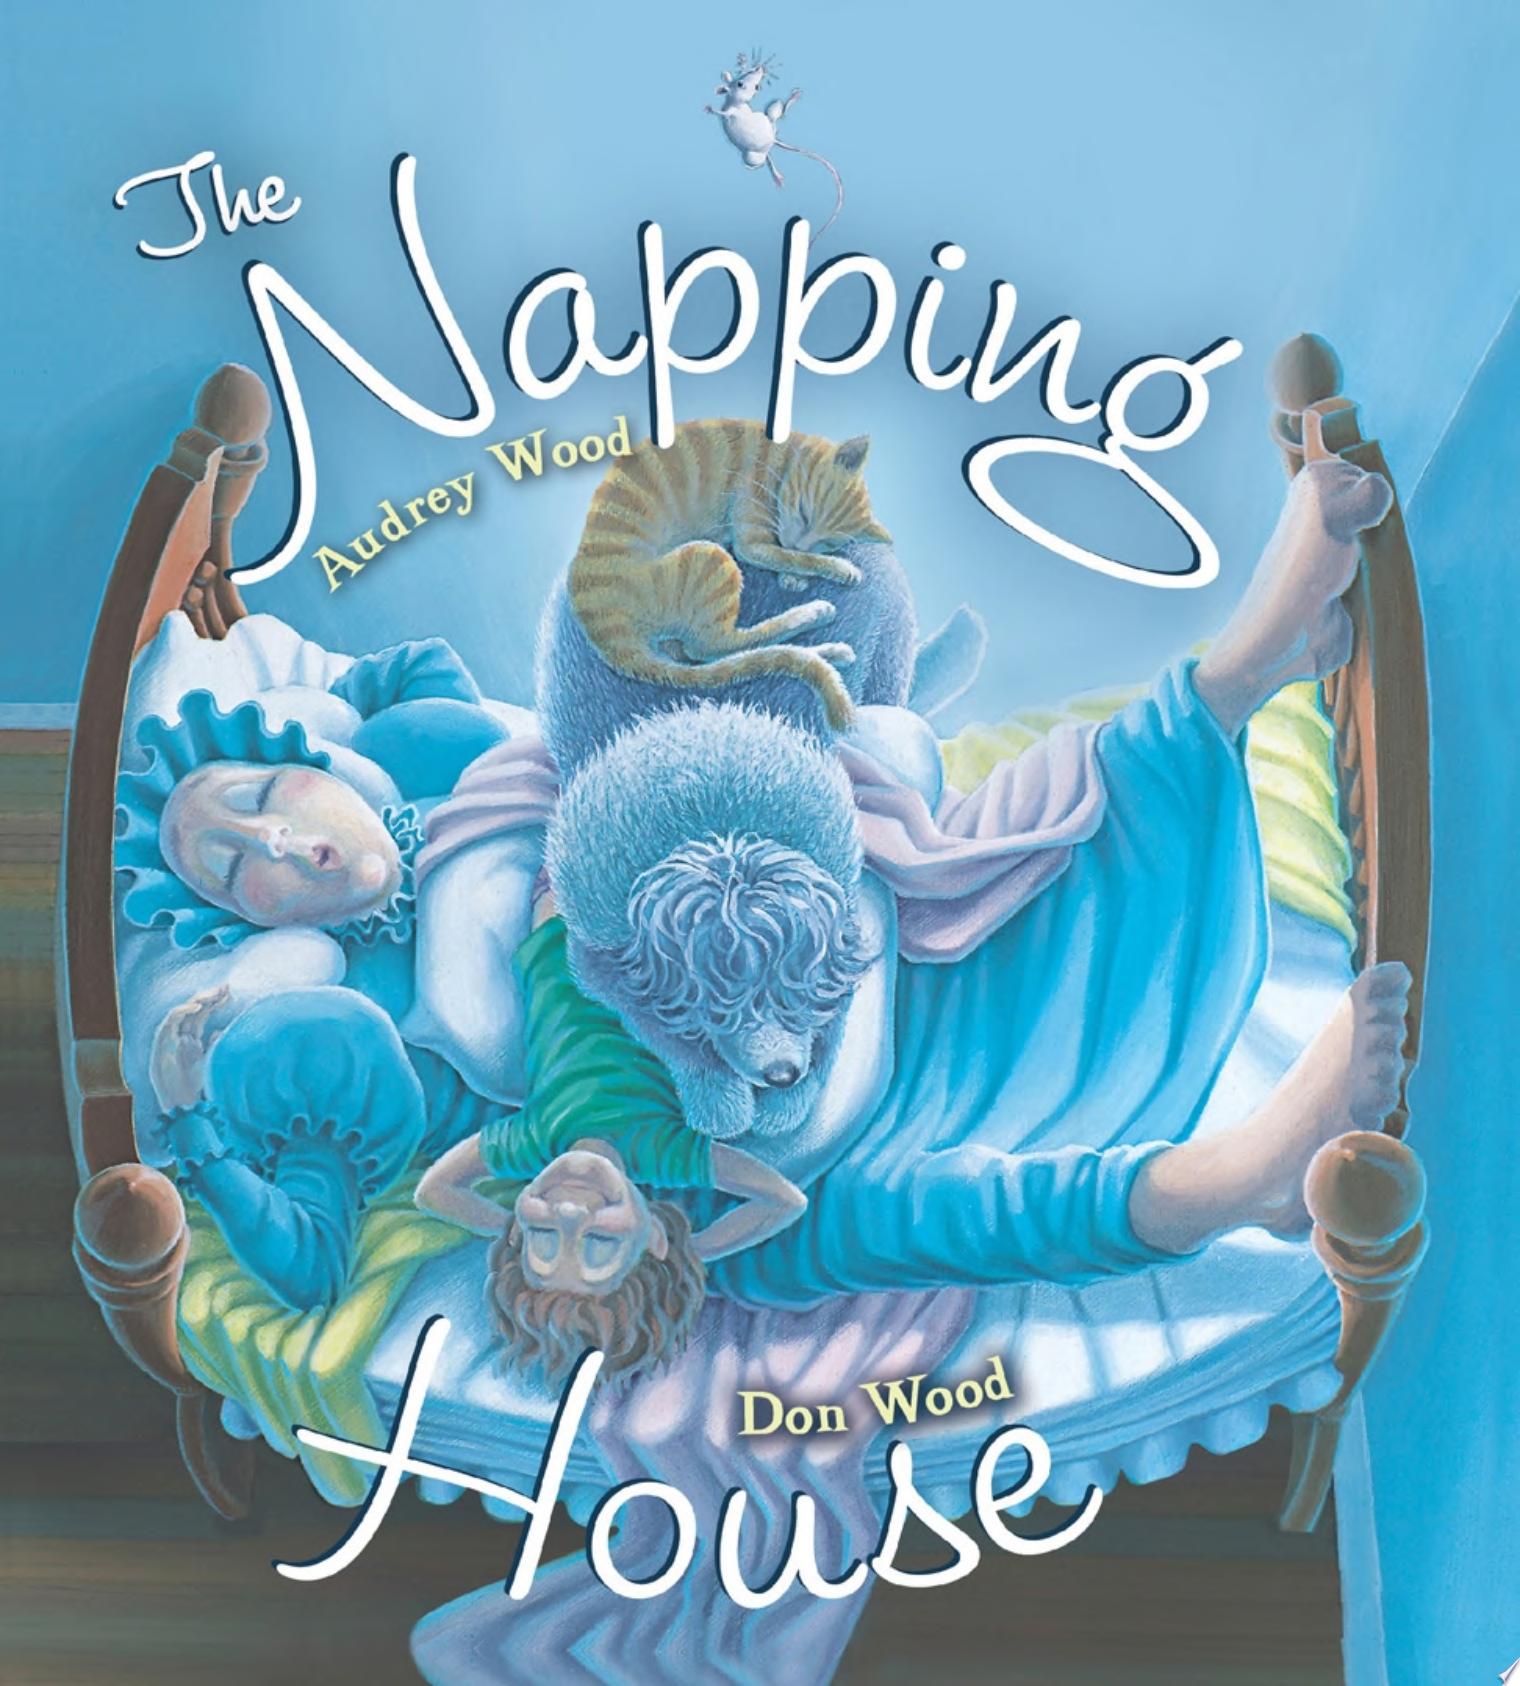 Image for "The Napping House"